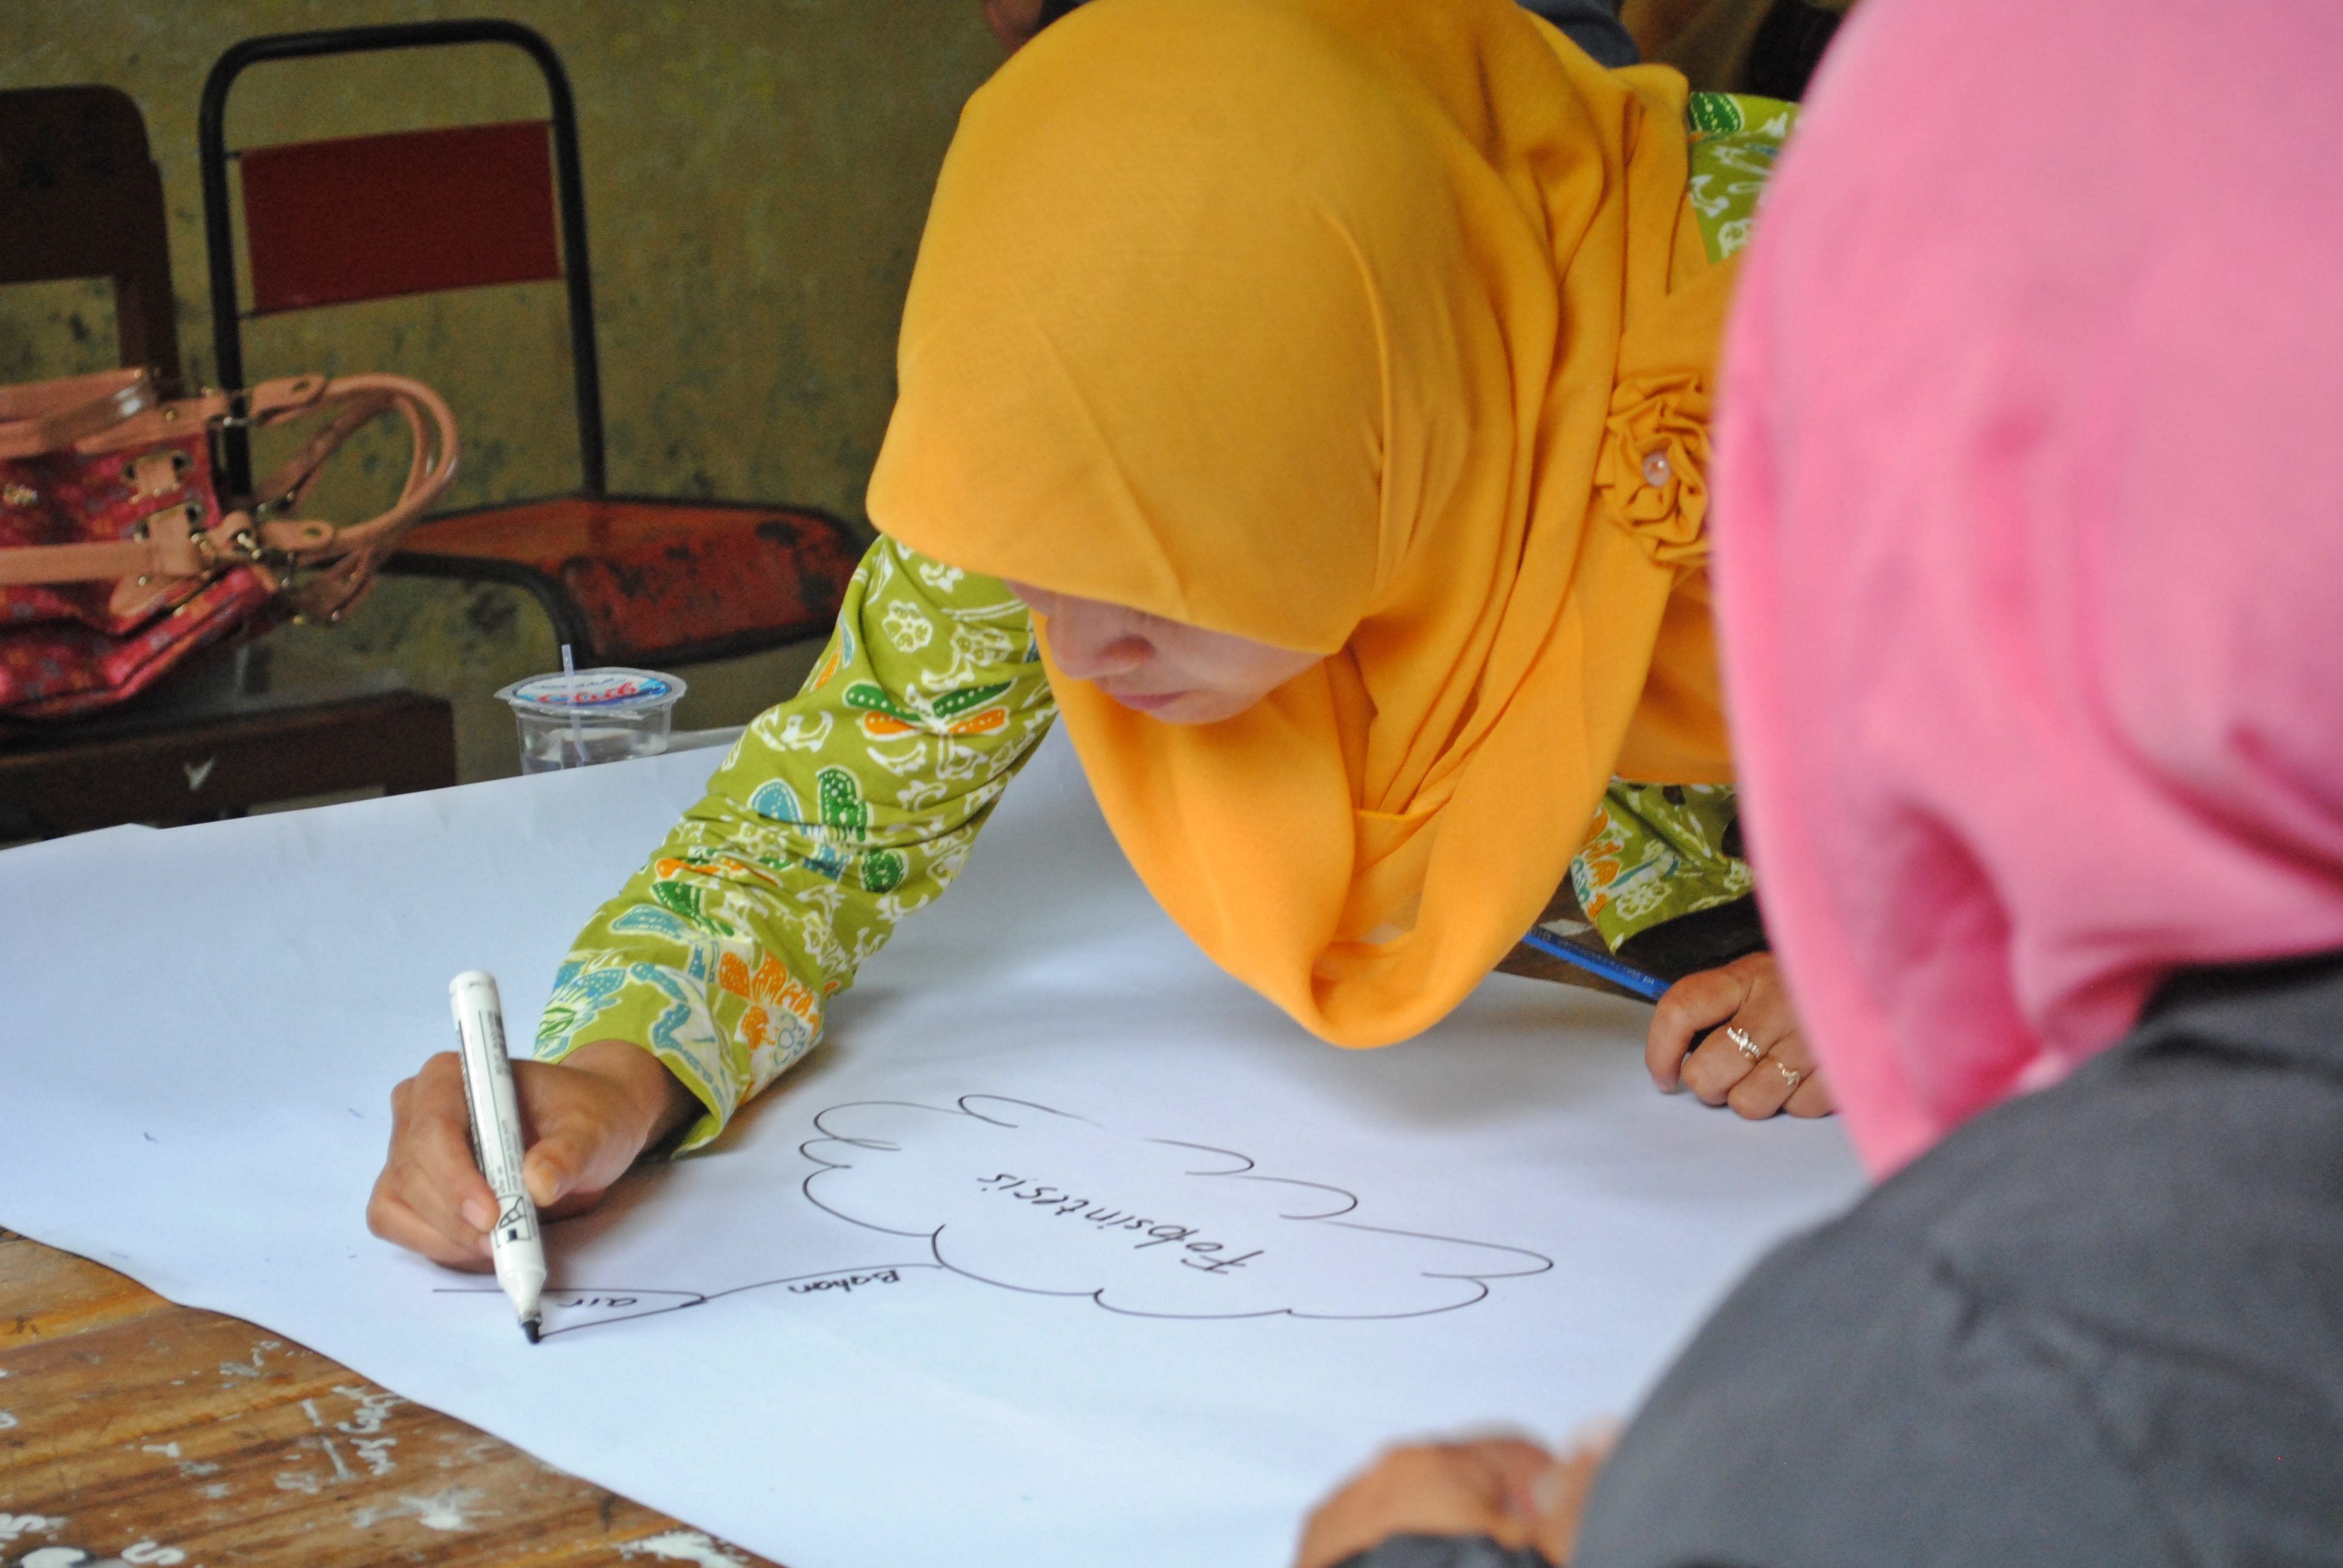 A hijabi person drawing a mind map on a broad sheet of paper